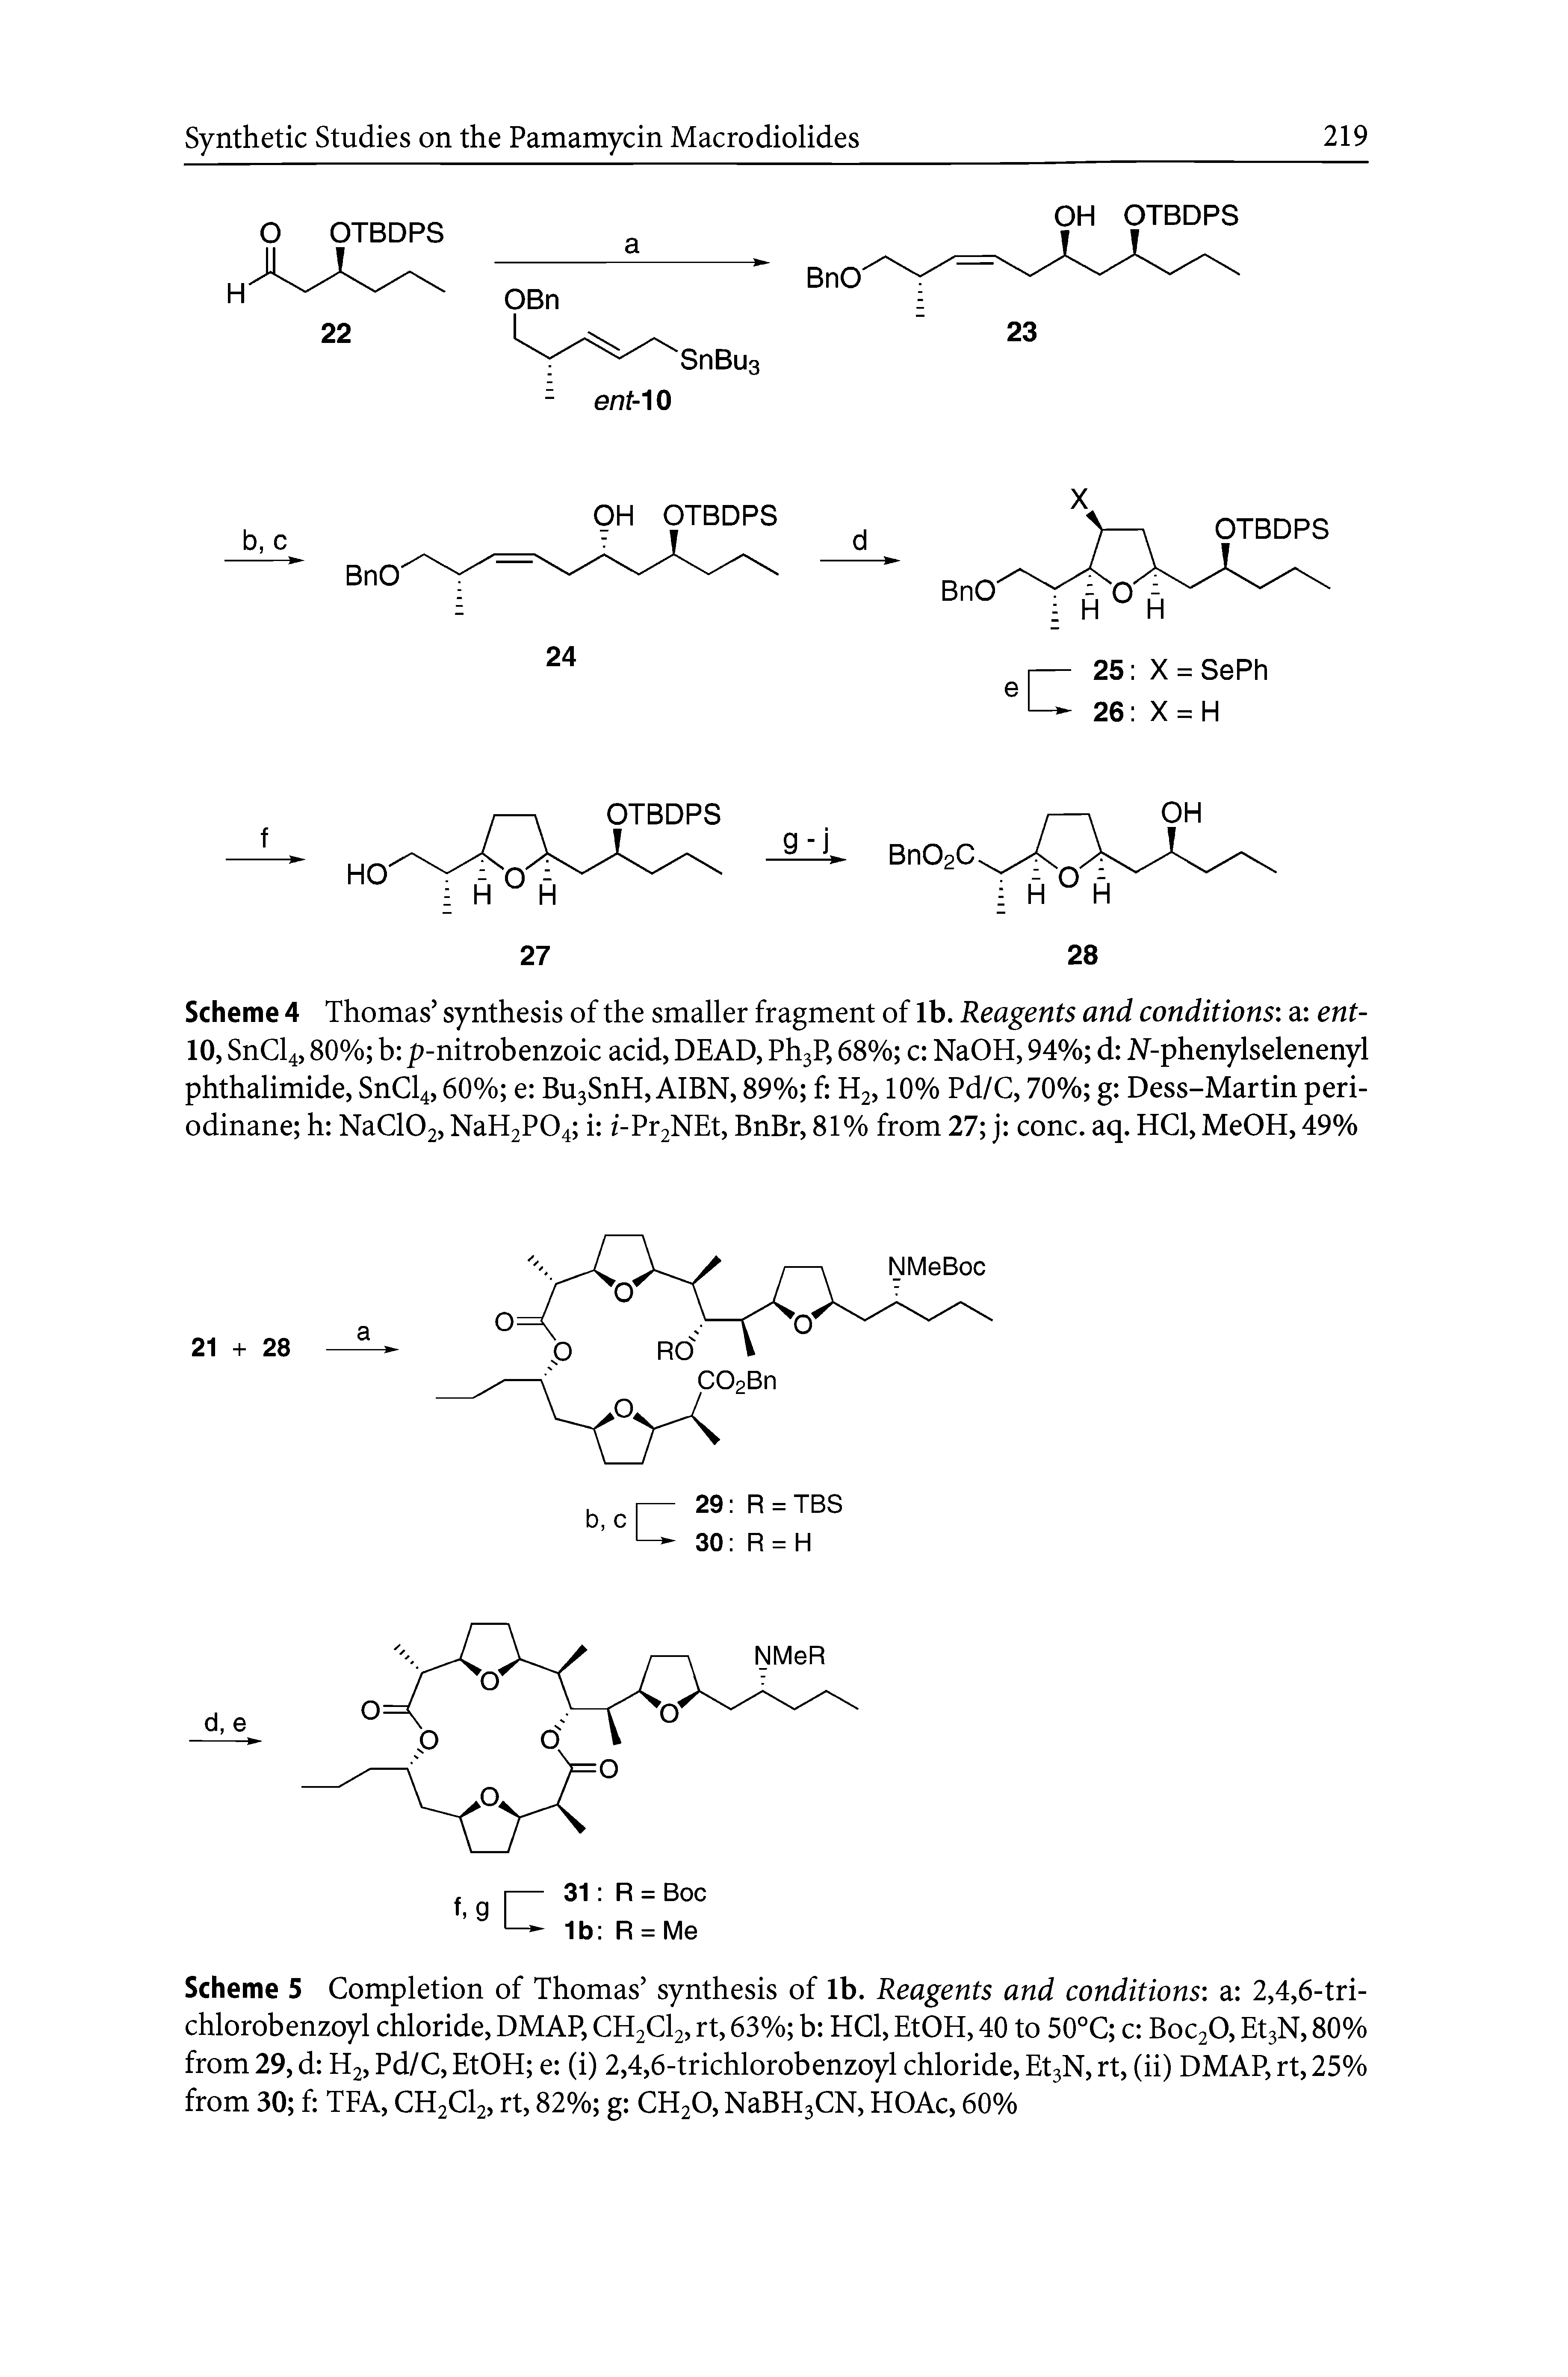 Scheme 5 Completion of Thomas synthesis of lb. Reagents and conditions a 2,4,6-tri-chlorobenzoyl chloride, DMAP, CH2CI2, rt, 63% b HCl, EtOH, 40 to 50°C c B0C2O, Et3N, 80% from 29, d H2, Pd/C, EtOH e (i) 2,4,6-trichlorobenzoyl chloride, Et3N, rt, (ii) DMAP, rt, 25% from 30 f TEA, CH2CI2, rt, 82% g CH2O, NaBH3CN, HOAc, 60%...